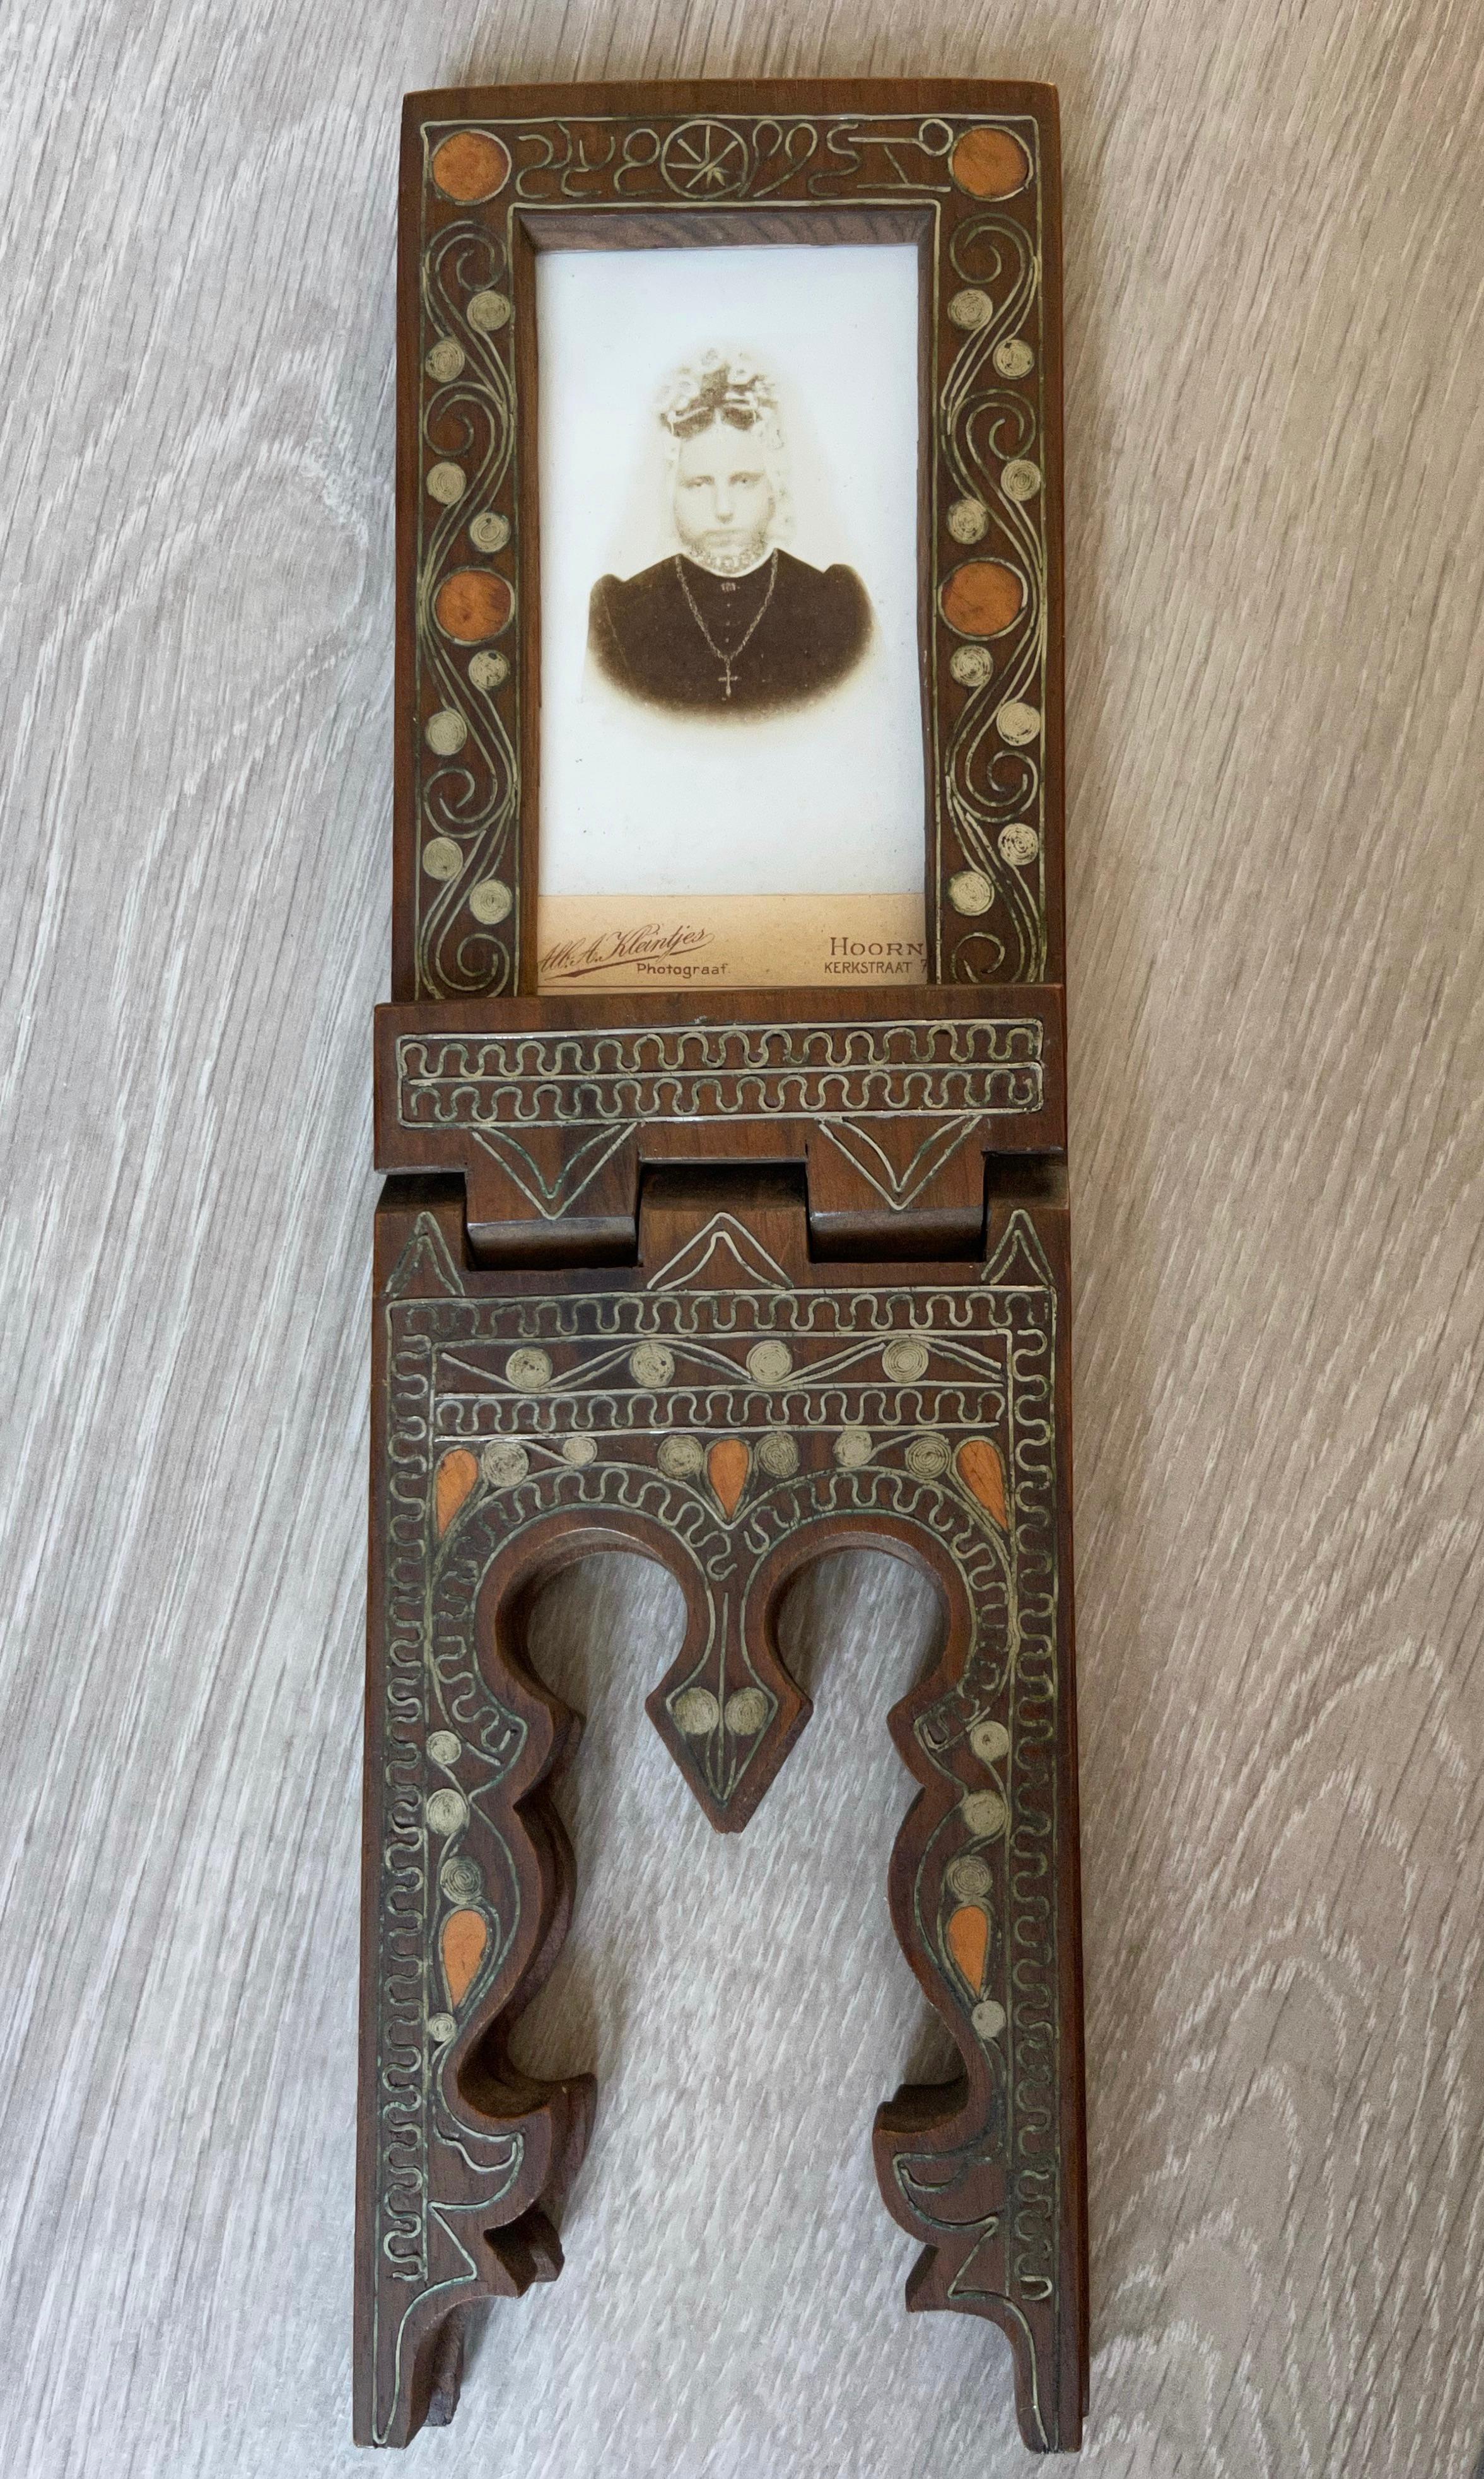 Handcrafted of one piece of solid wood, inlaid with silver, scrolling, decorative picture frame.

This picture frame is easy to fold into a cross legged standing position and this rare example is inlaid with silver motifs and a glass-like red